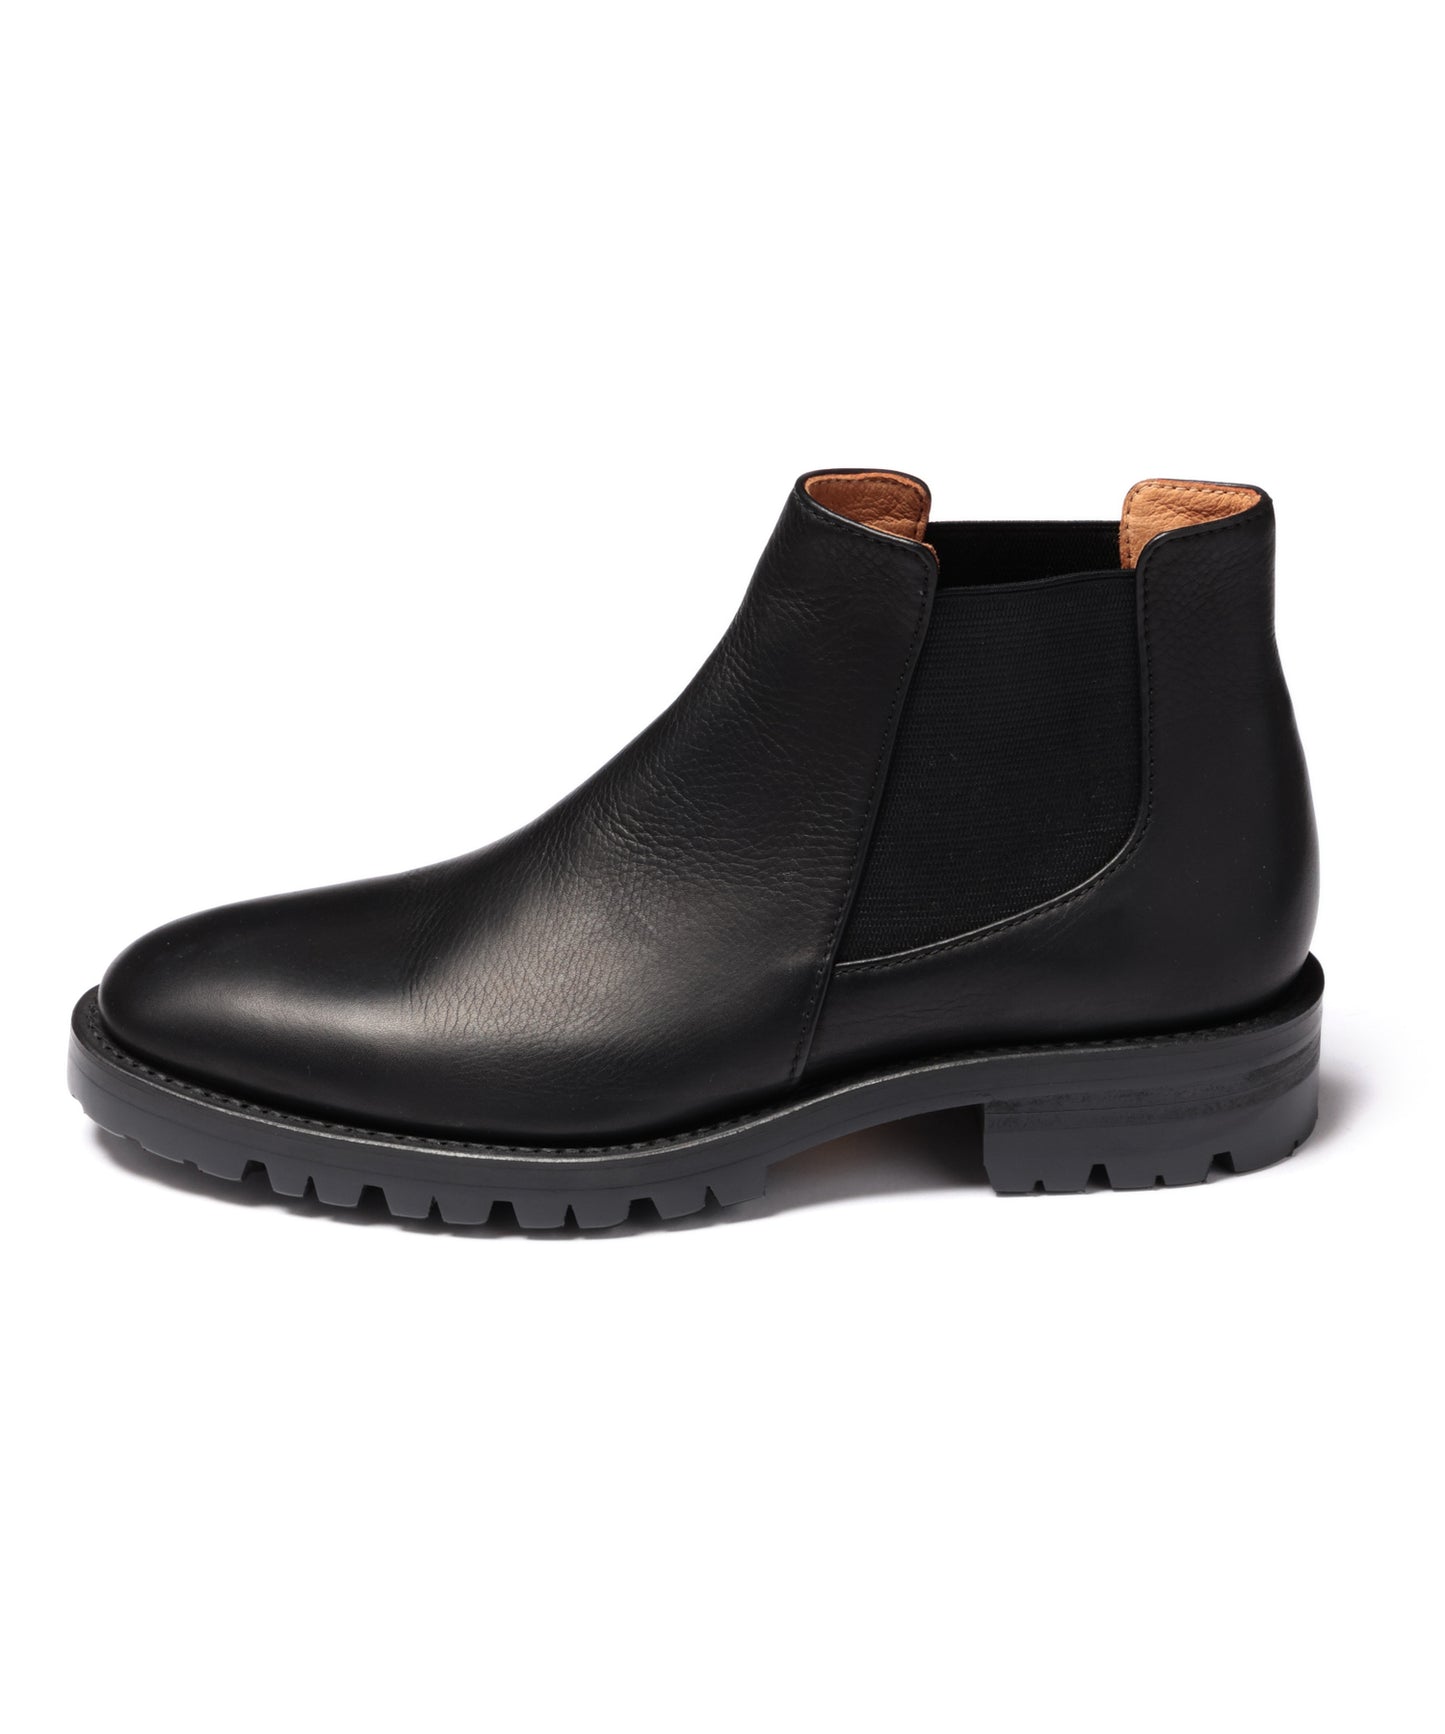 water proof shirink x vibram sole chelsea boots